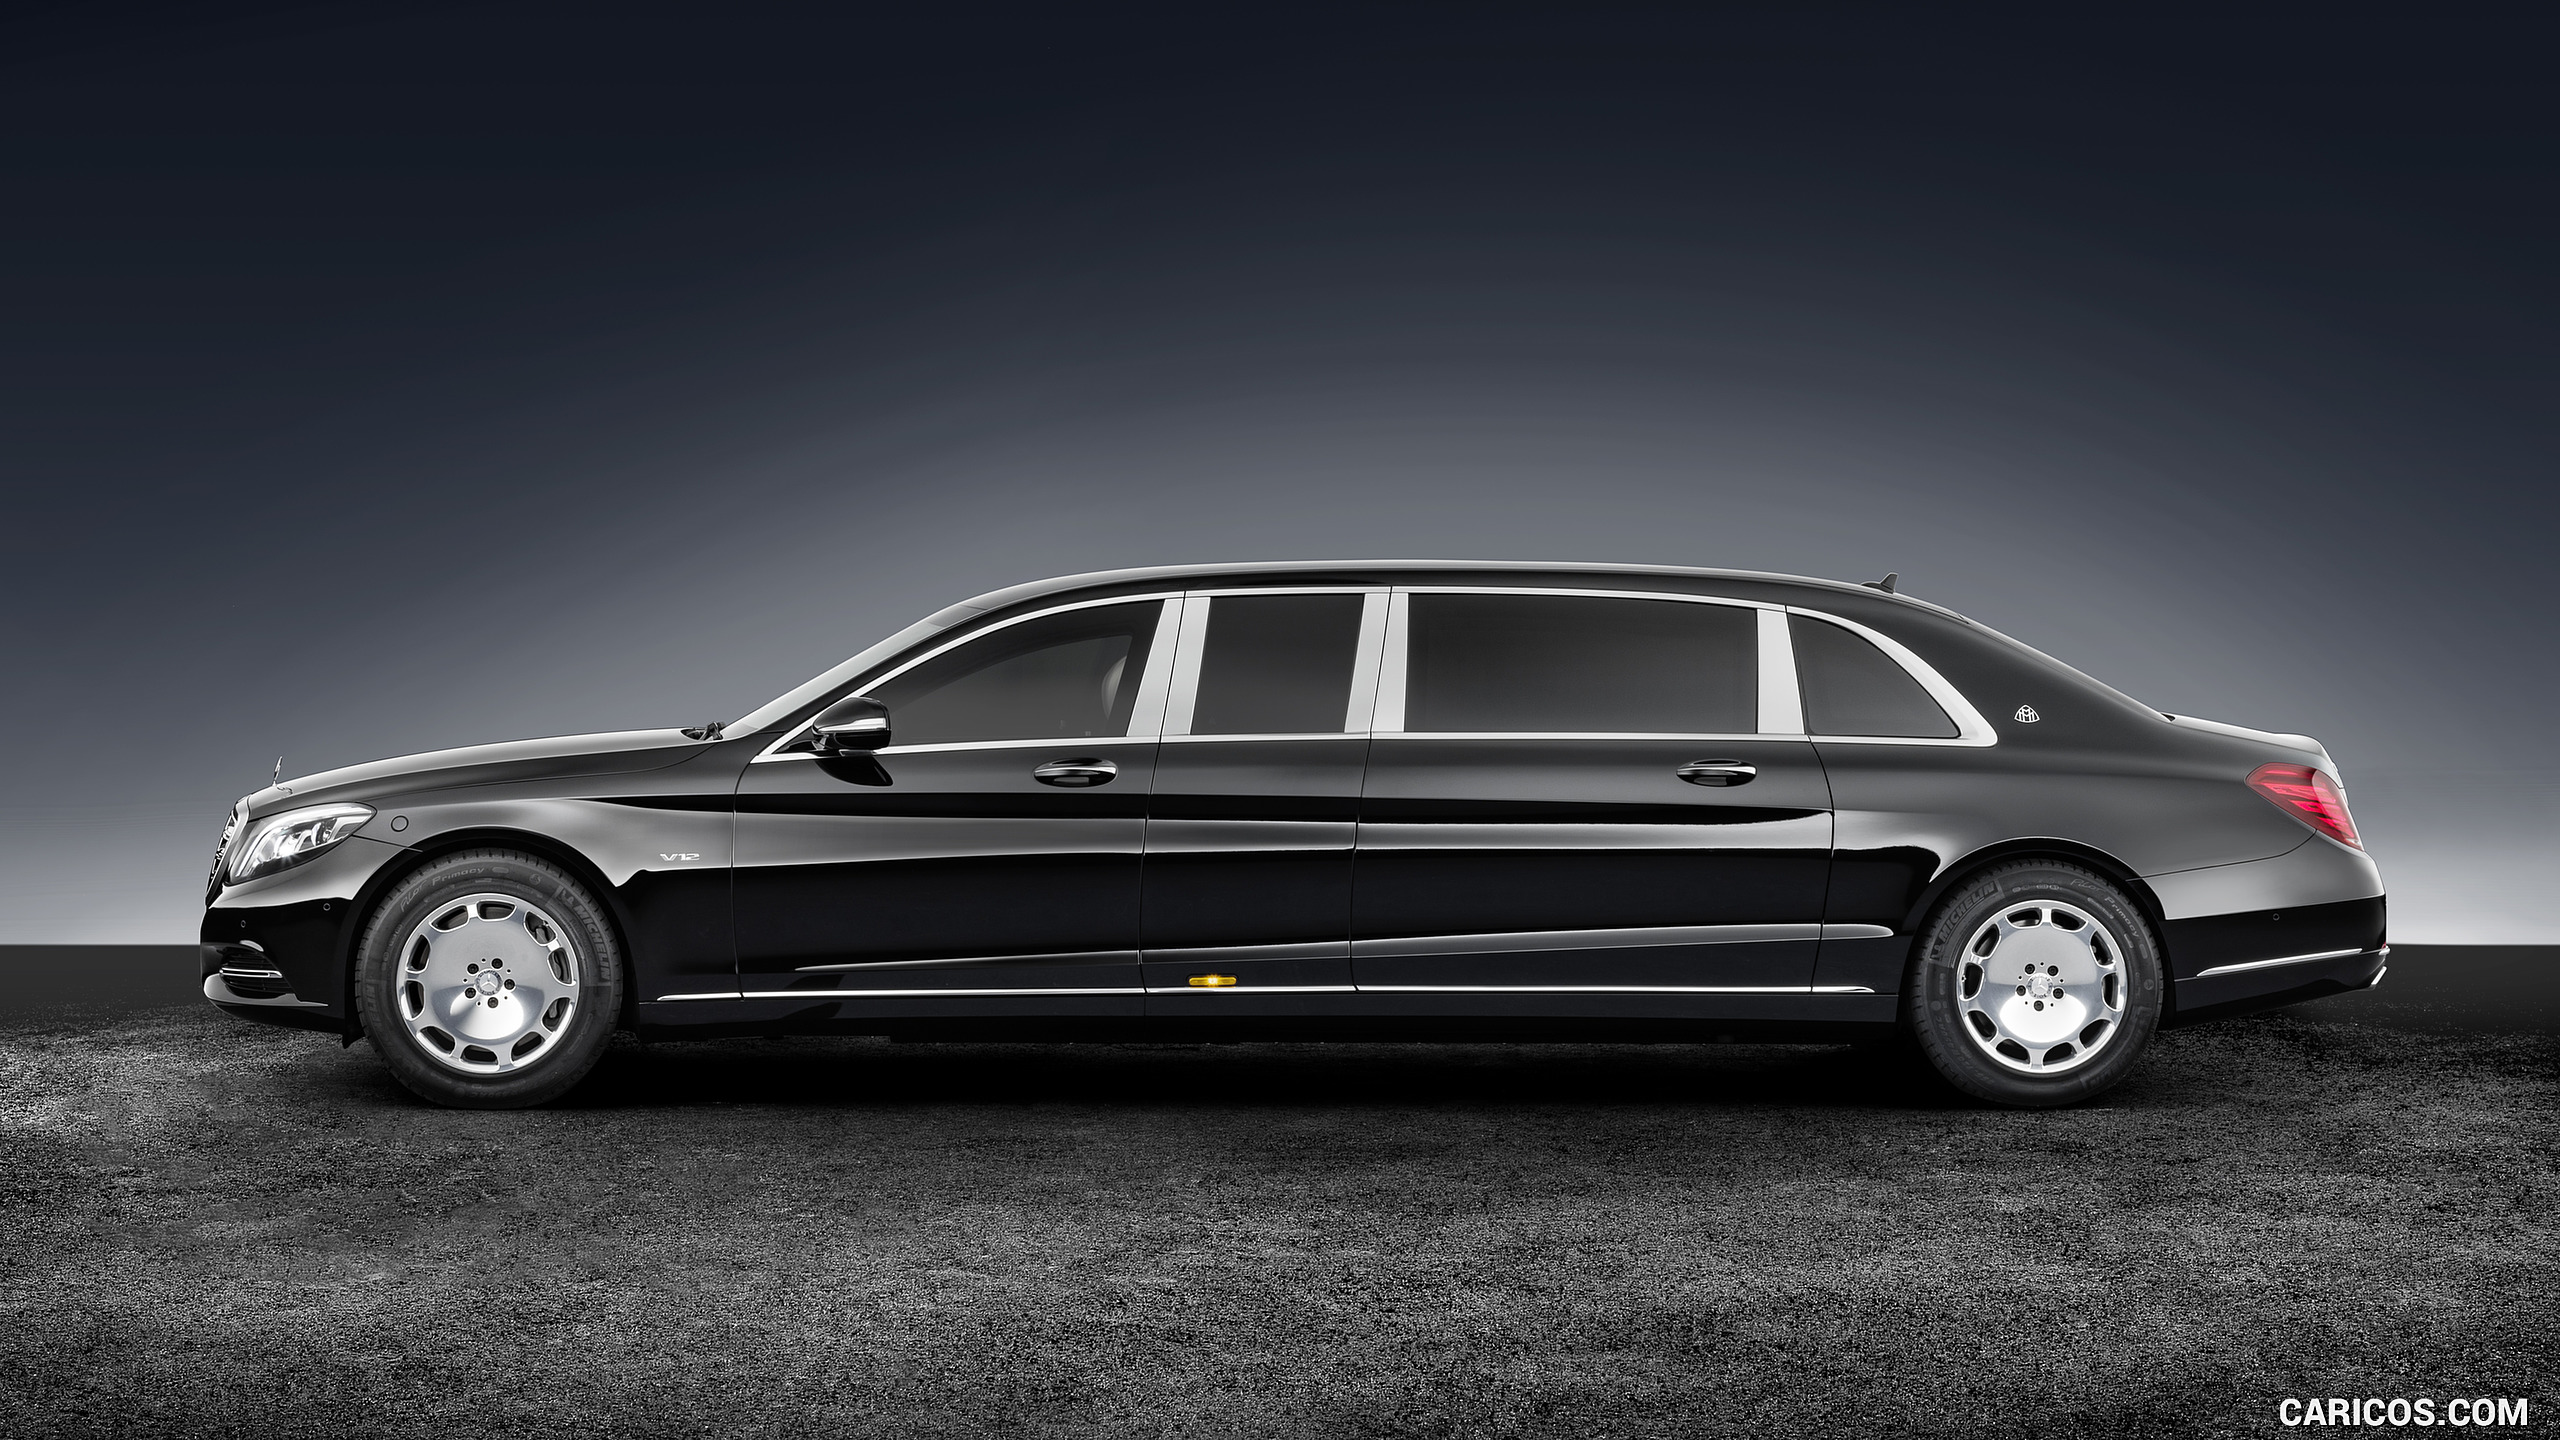 2018 Mercedes-Maybach S 600 Pullman Guard - Side, #2 of 12